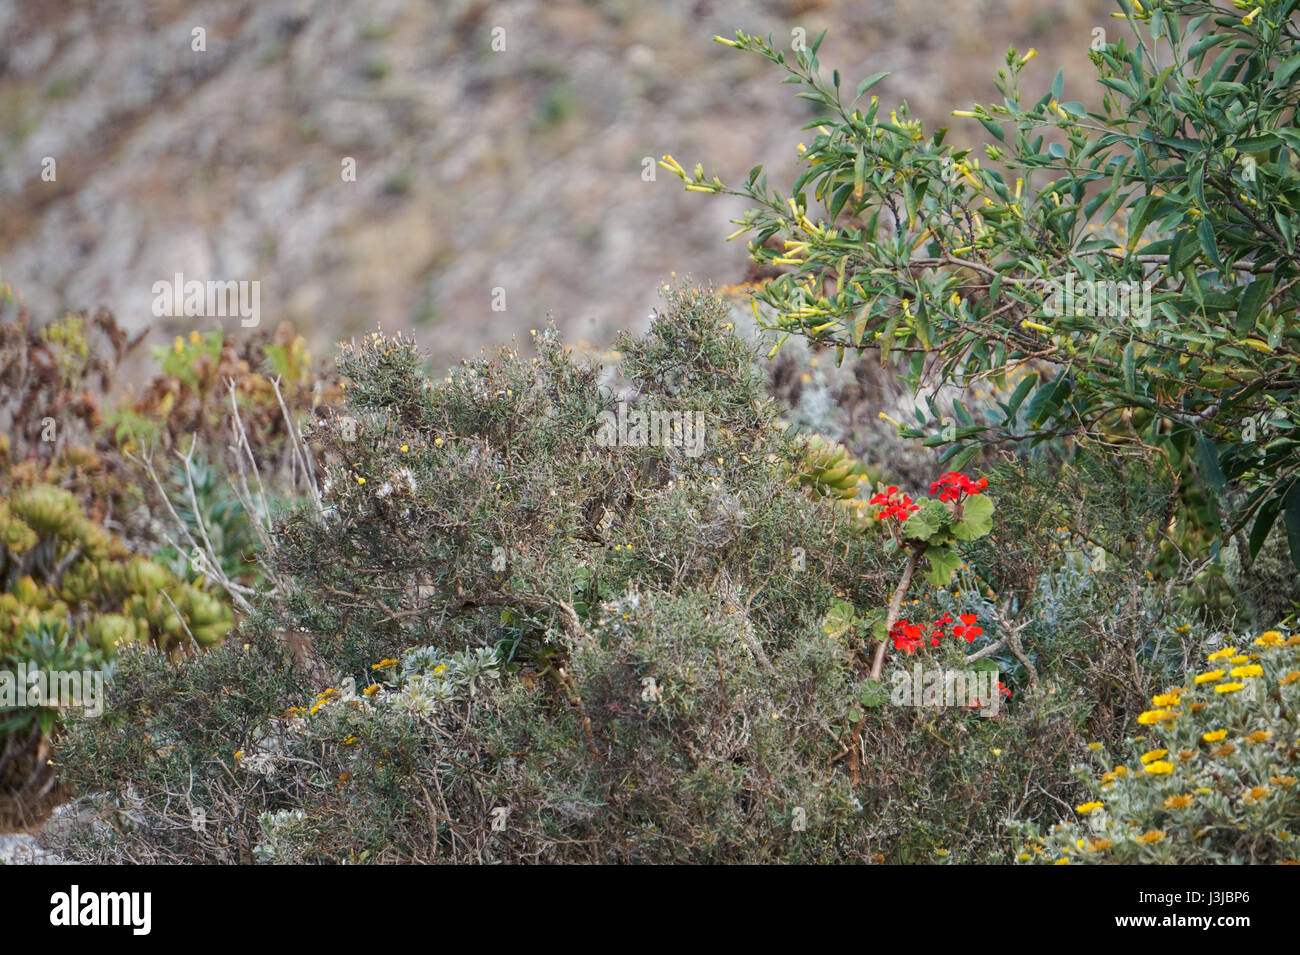 Plants and flowers adapted to the dry habtat of Lanzarote, Canary Island, Spain Stock Photo